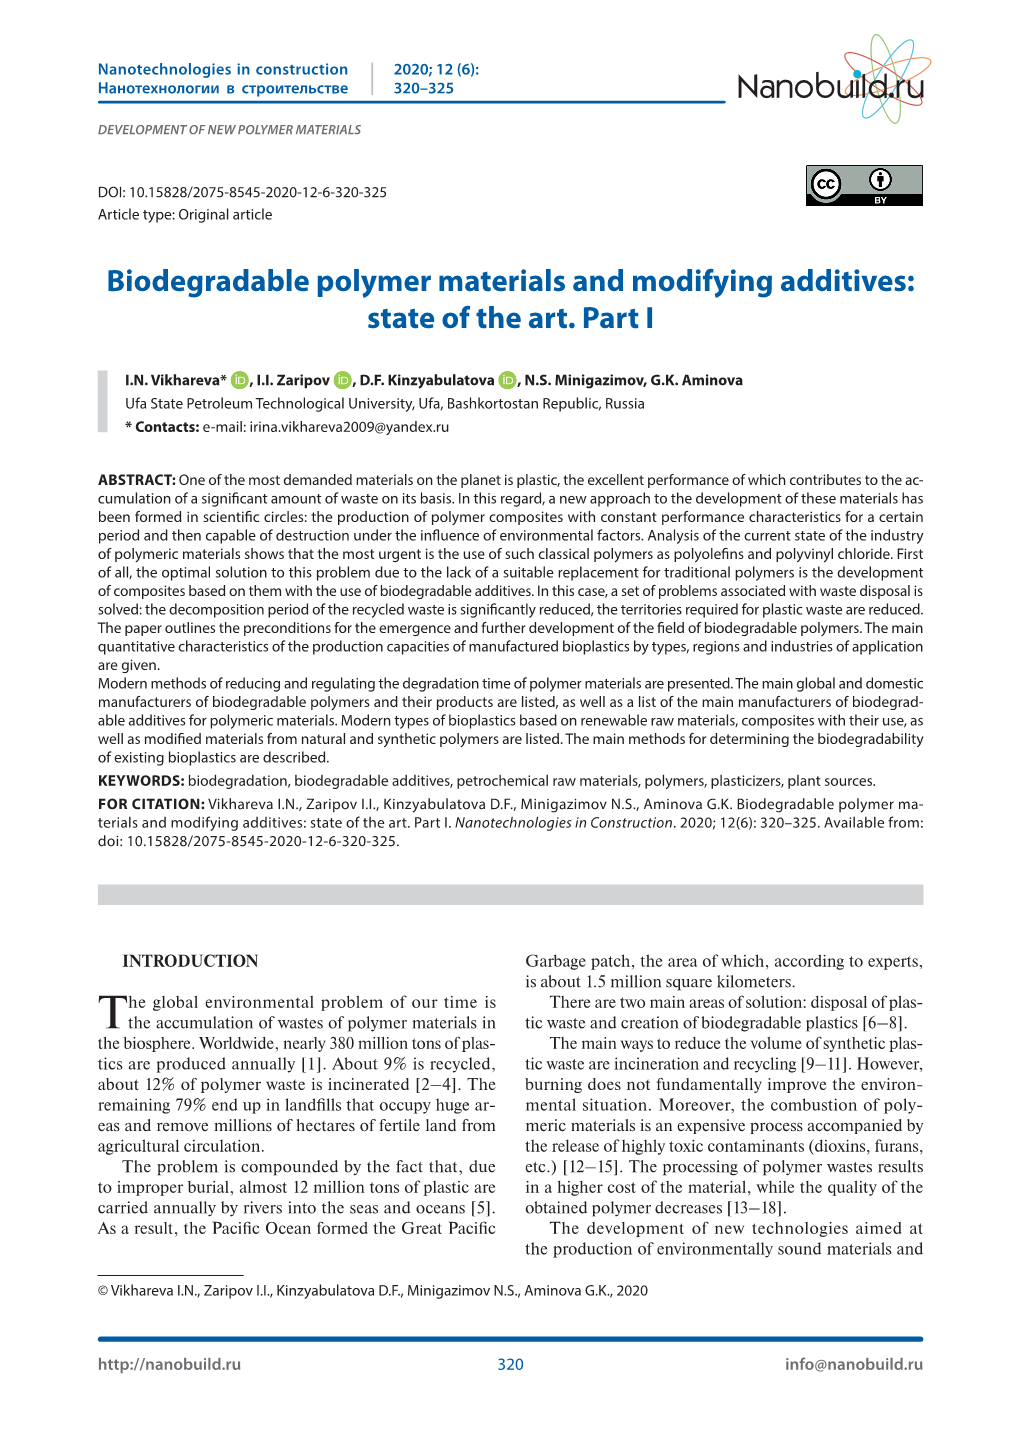 Biodegradable Polymer Materials and Modifying Additives: State of the Art